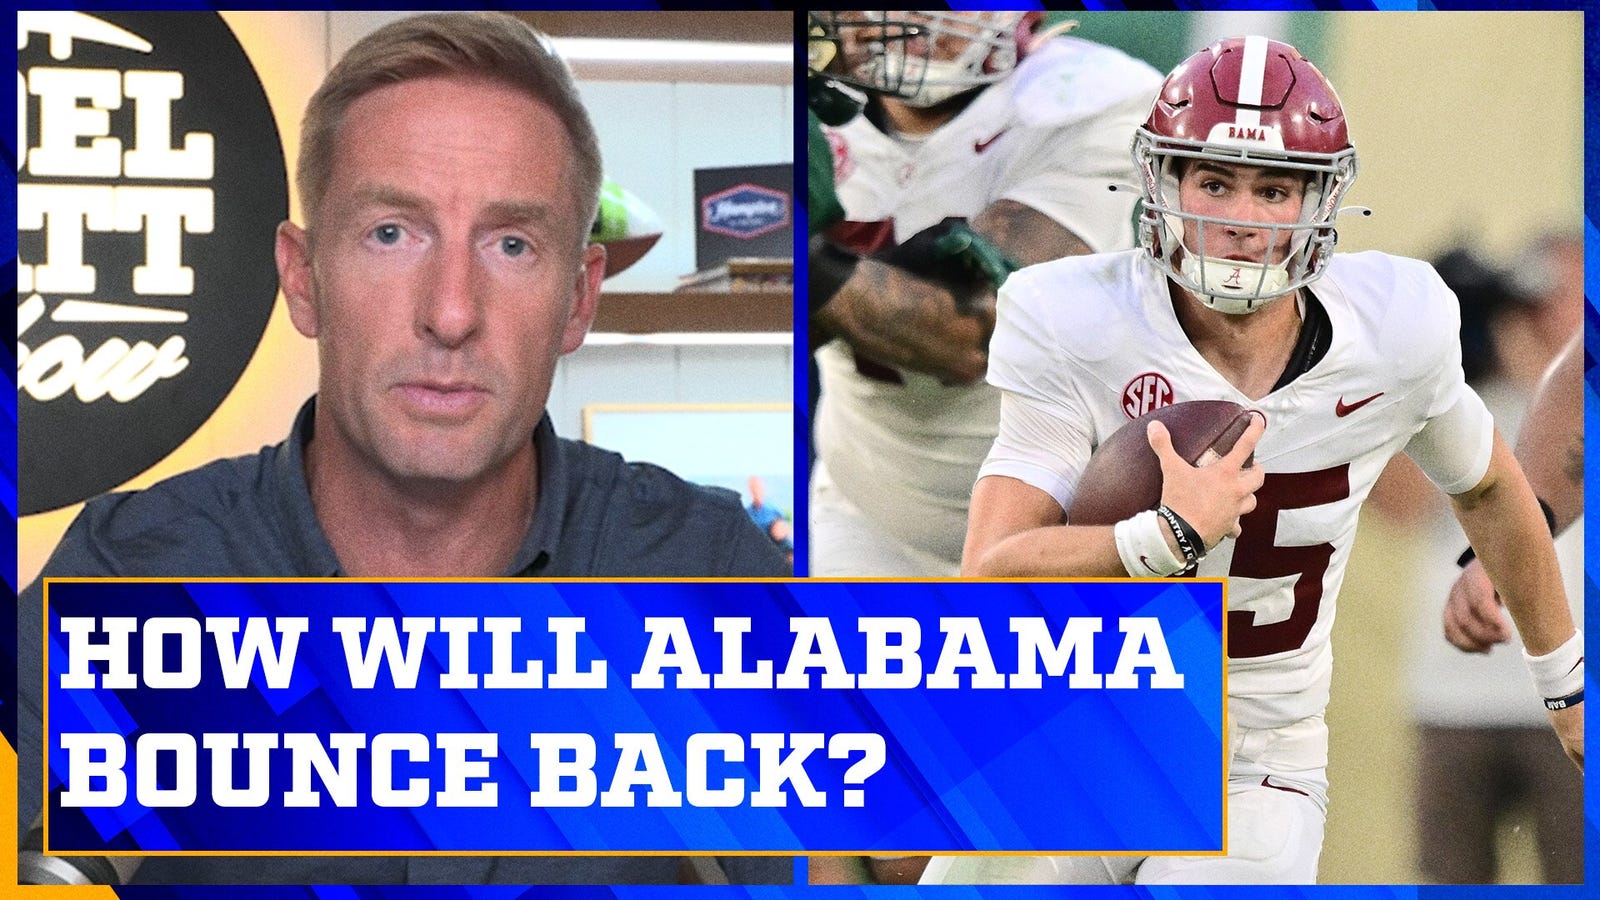 How will Alabama bounce back after an unconvincing start? 